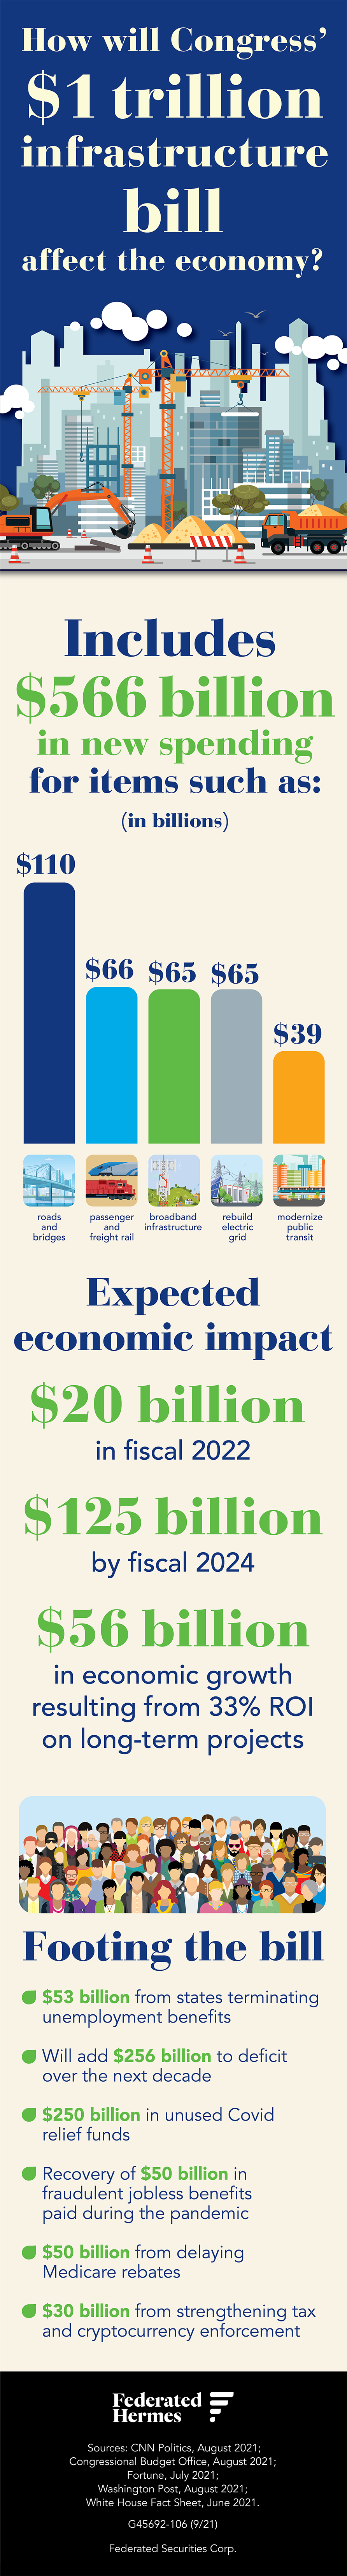 Infrastructure Bill alt text Infographic Published: September 16, 2021. Title: How will Congress’ $1 trillion infrastructure bill affect the economy? The bill includes $566 billion in new spending for items such as: (dollars in billions) The graph shows $110 billion on roads and bridges, $66 billion on passenger and freight rail, $65 billion on broadband infrastructure, $65 billion to rebuild electric grid and $39 billion to modernize public transit. This bill is expected to have an economic impact. Some examples of this impact are: $20 billion in fiscal 2022, $125 billion in fiscal 2024 and $56 billion in economic growth resulting from 33% return on investment on long-term projects. Footing the bill. $53 billion from states terminating unemployment benefits. Will add $256 billion to deficit over the next decade. $250 billion in unused Covid relief funds. Recovery of $50 billion in fraudulent jobless benefits paid during the pandemic. $50 billion from delaying Medicare rebates. $30 billion from strengthening tax and cryptocurrency enforcement. Sources: CNN Politics, August 2021; Congressional Budget Office, August 2021; Fortune, July 2021; Washington Post, August 2021; White House Fact Sheet, June 2021. 